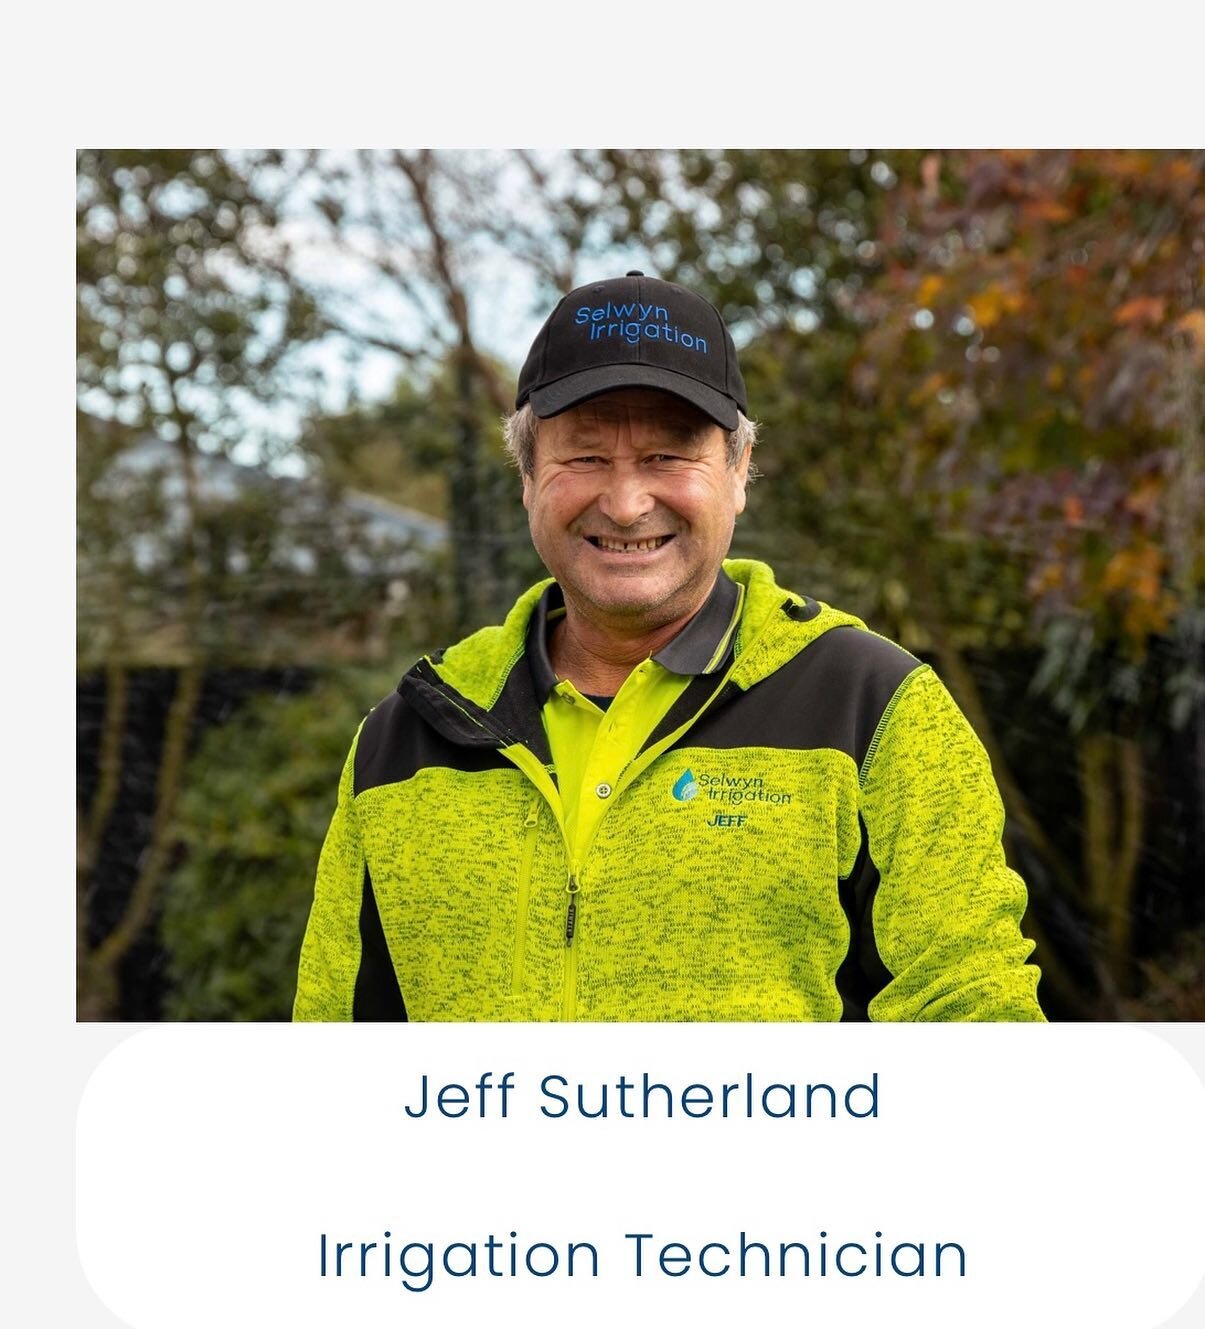 Introducing - Jeff Sutherland 

Jeff brings over six years of Irrigation experience to the Selwyn Irrigation partnership having worked those years alongside Simon. Jeff spent some twenty years in a customer service-based company prior to entering the